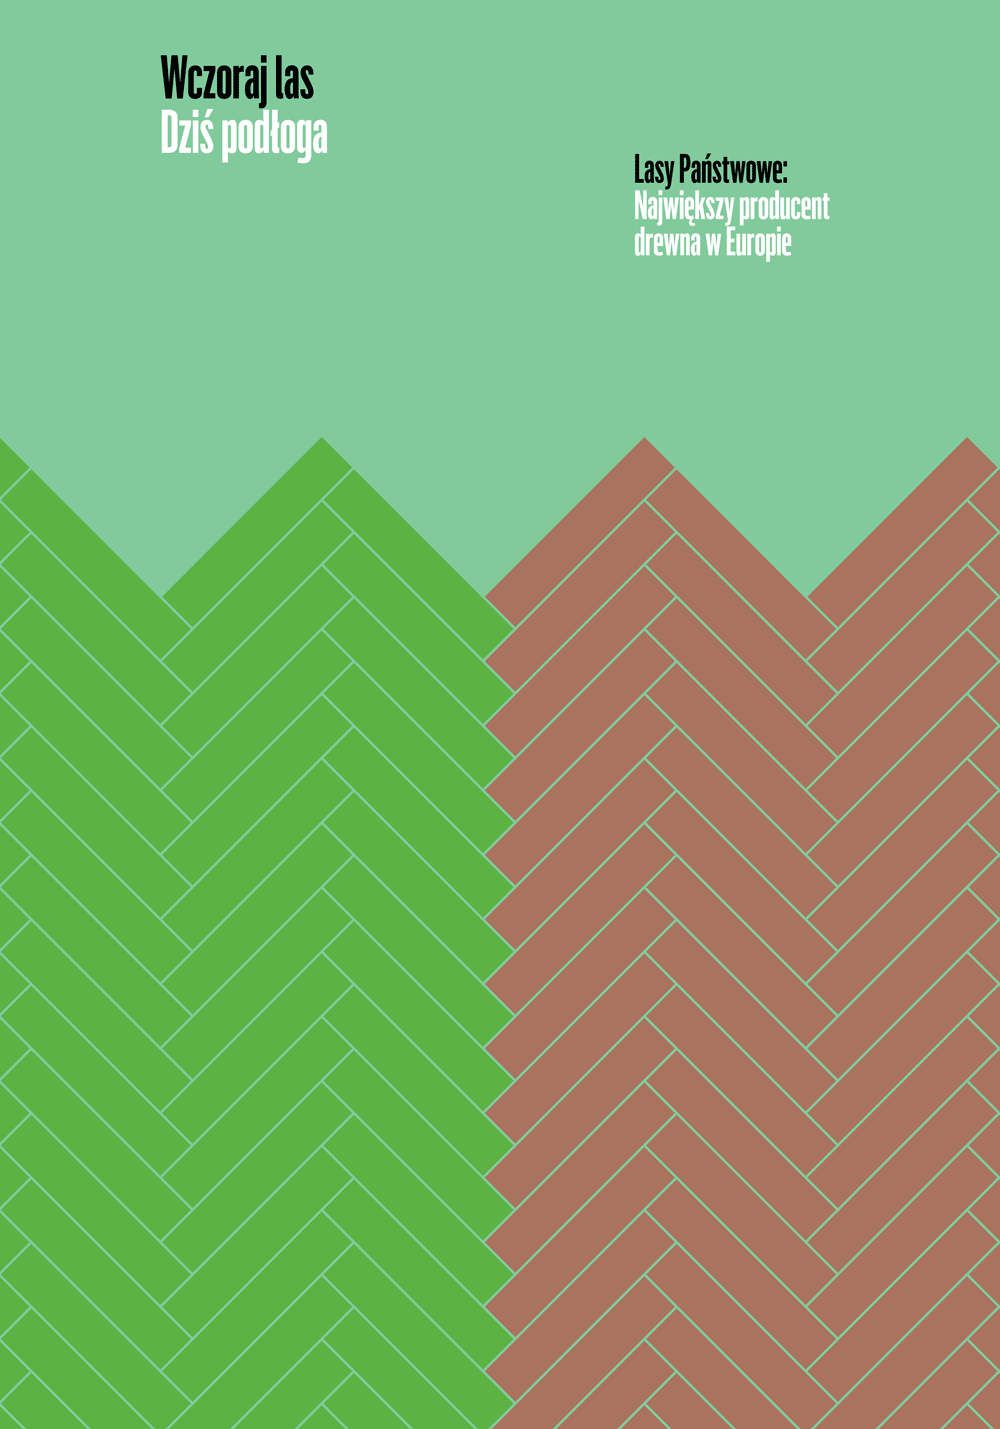 A poster showing geometric shapes forming a parquet in green and brown.